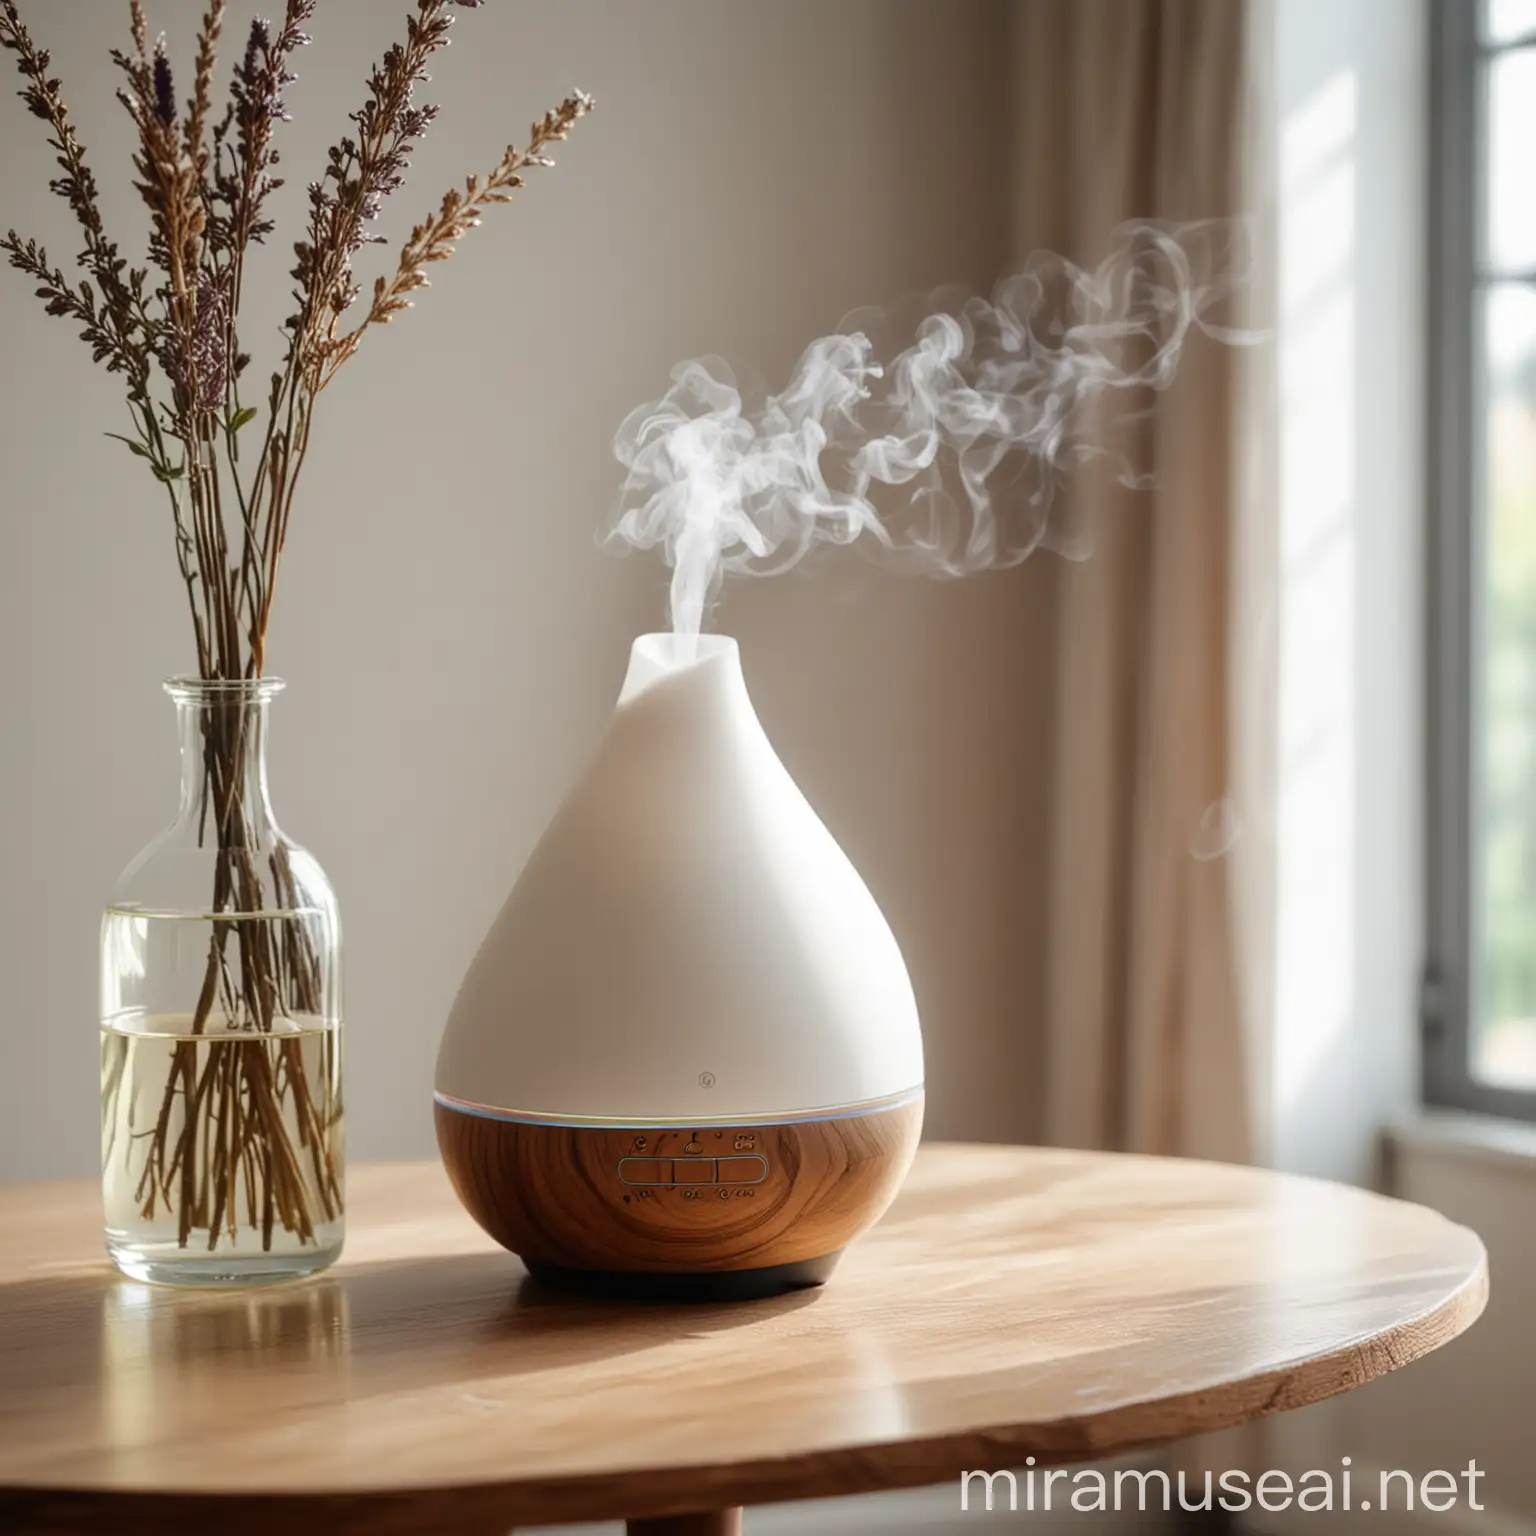 an essential oil diffuser on a table in a clean home, bright, beautiful natural light. health, wellbeing